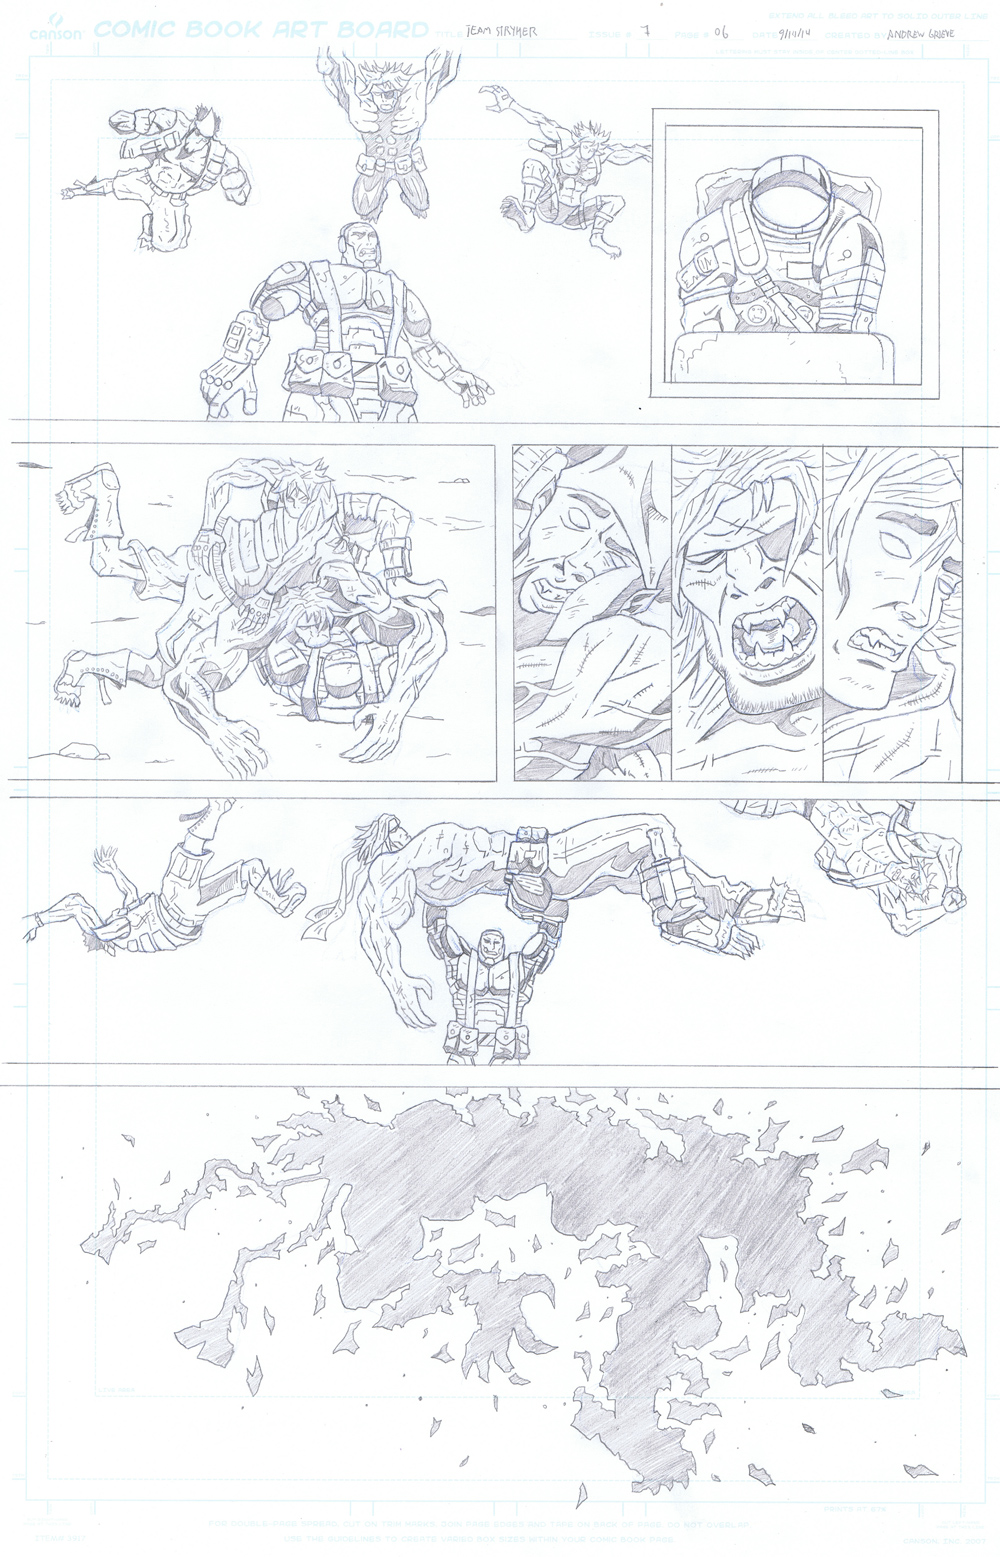 MISSION 007: PAGE 06 PENCIL